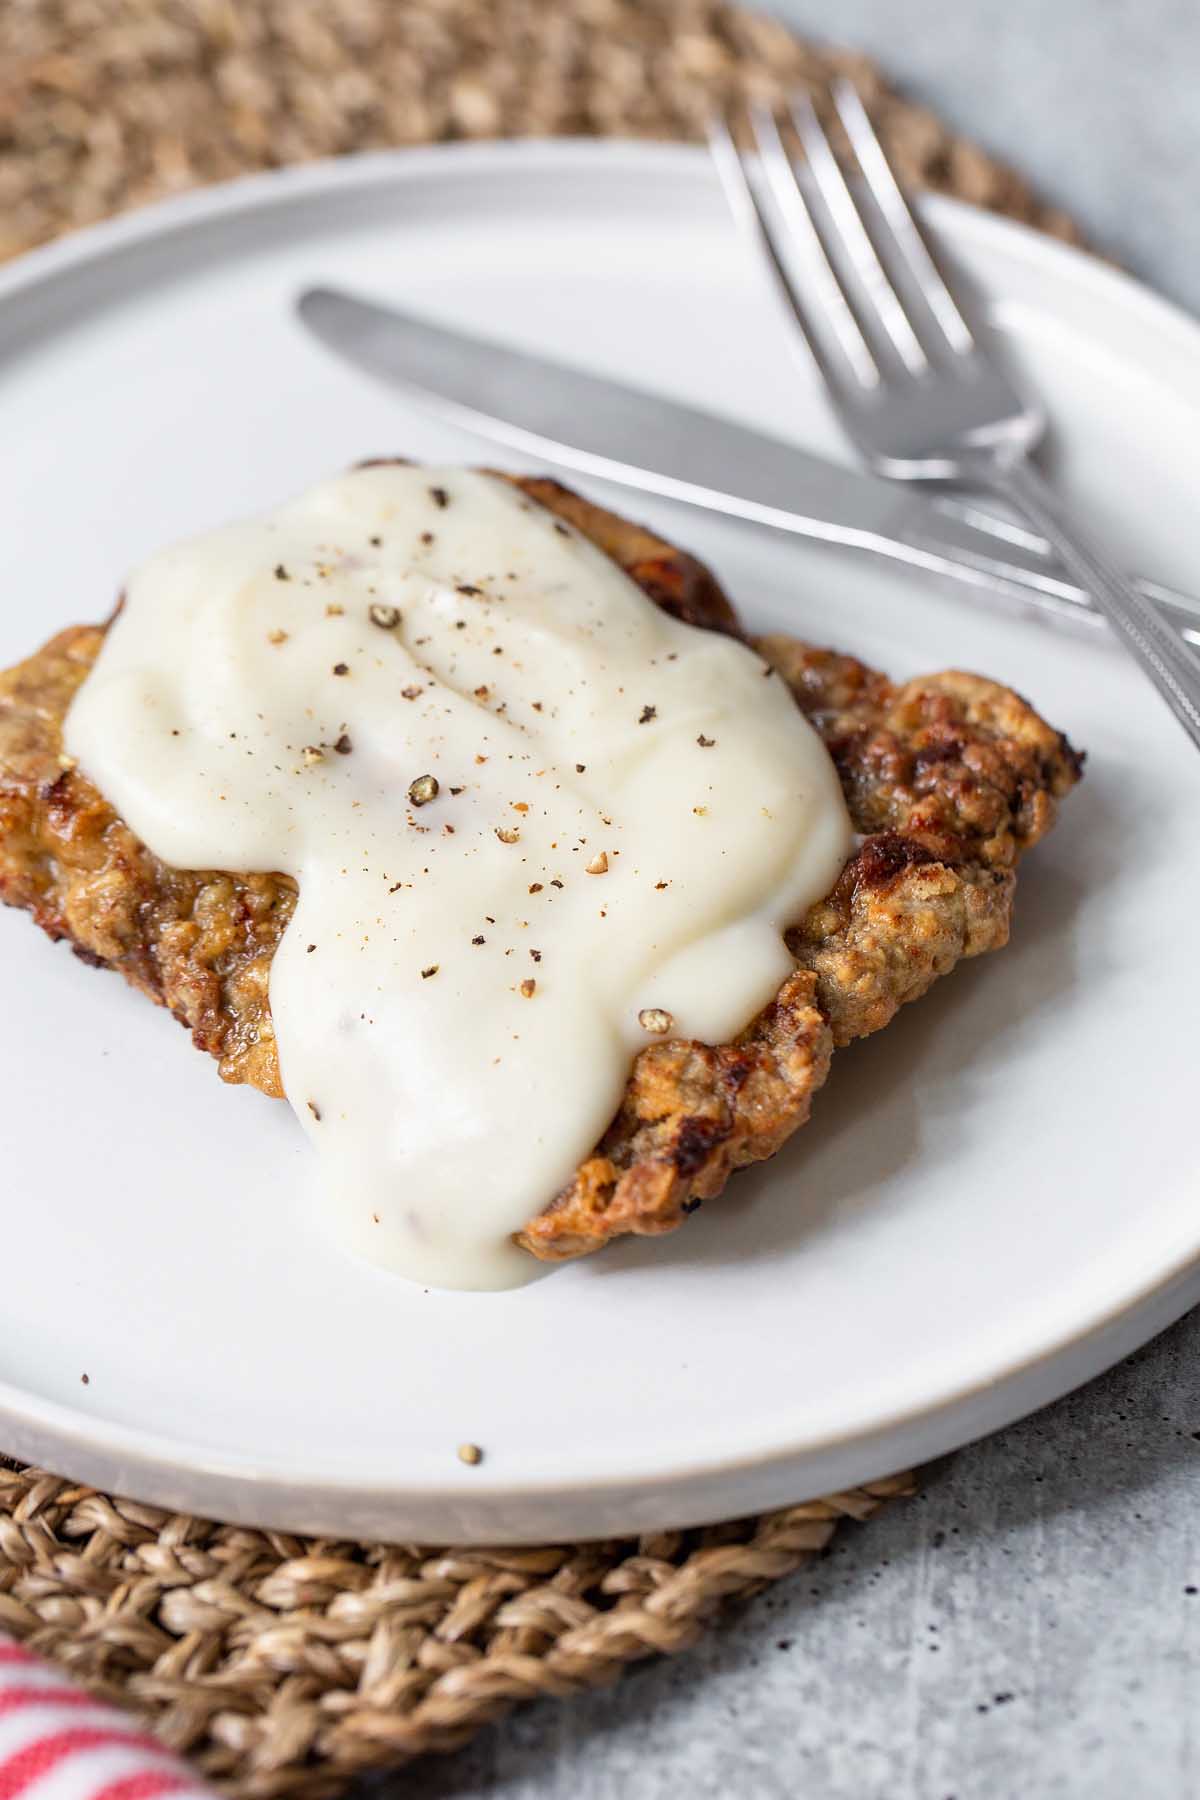 country fried steak with white gravy